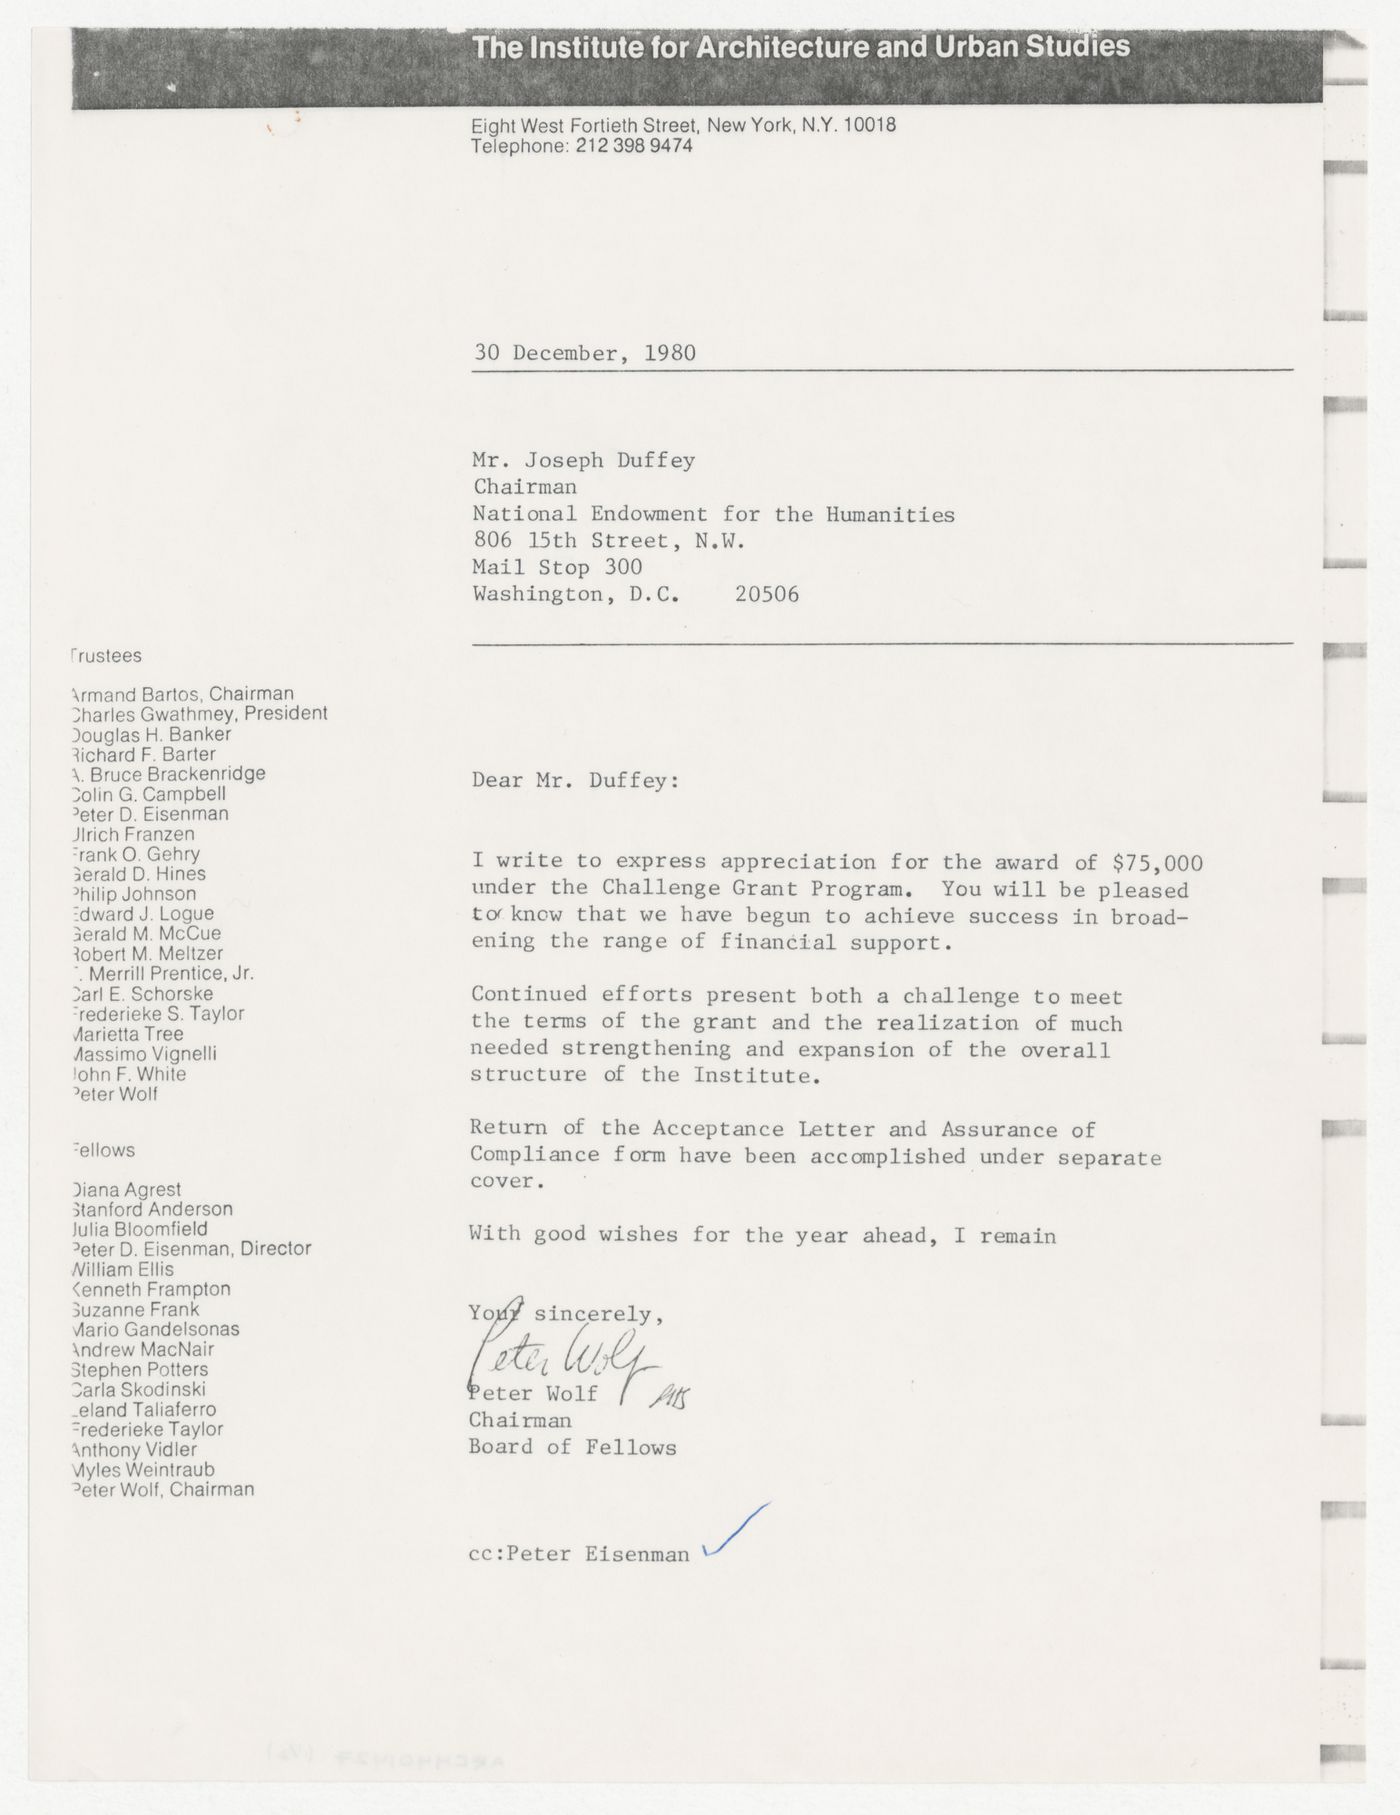 Letter from Peter Wolf to Joseph Duffeyabout IAUS receiving National Endowment for the Humanities (NEH) Challenge Grant with attached signed assurance of compliance with NEH regulations